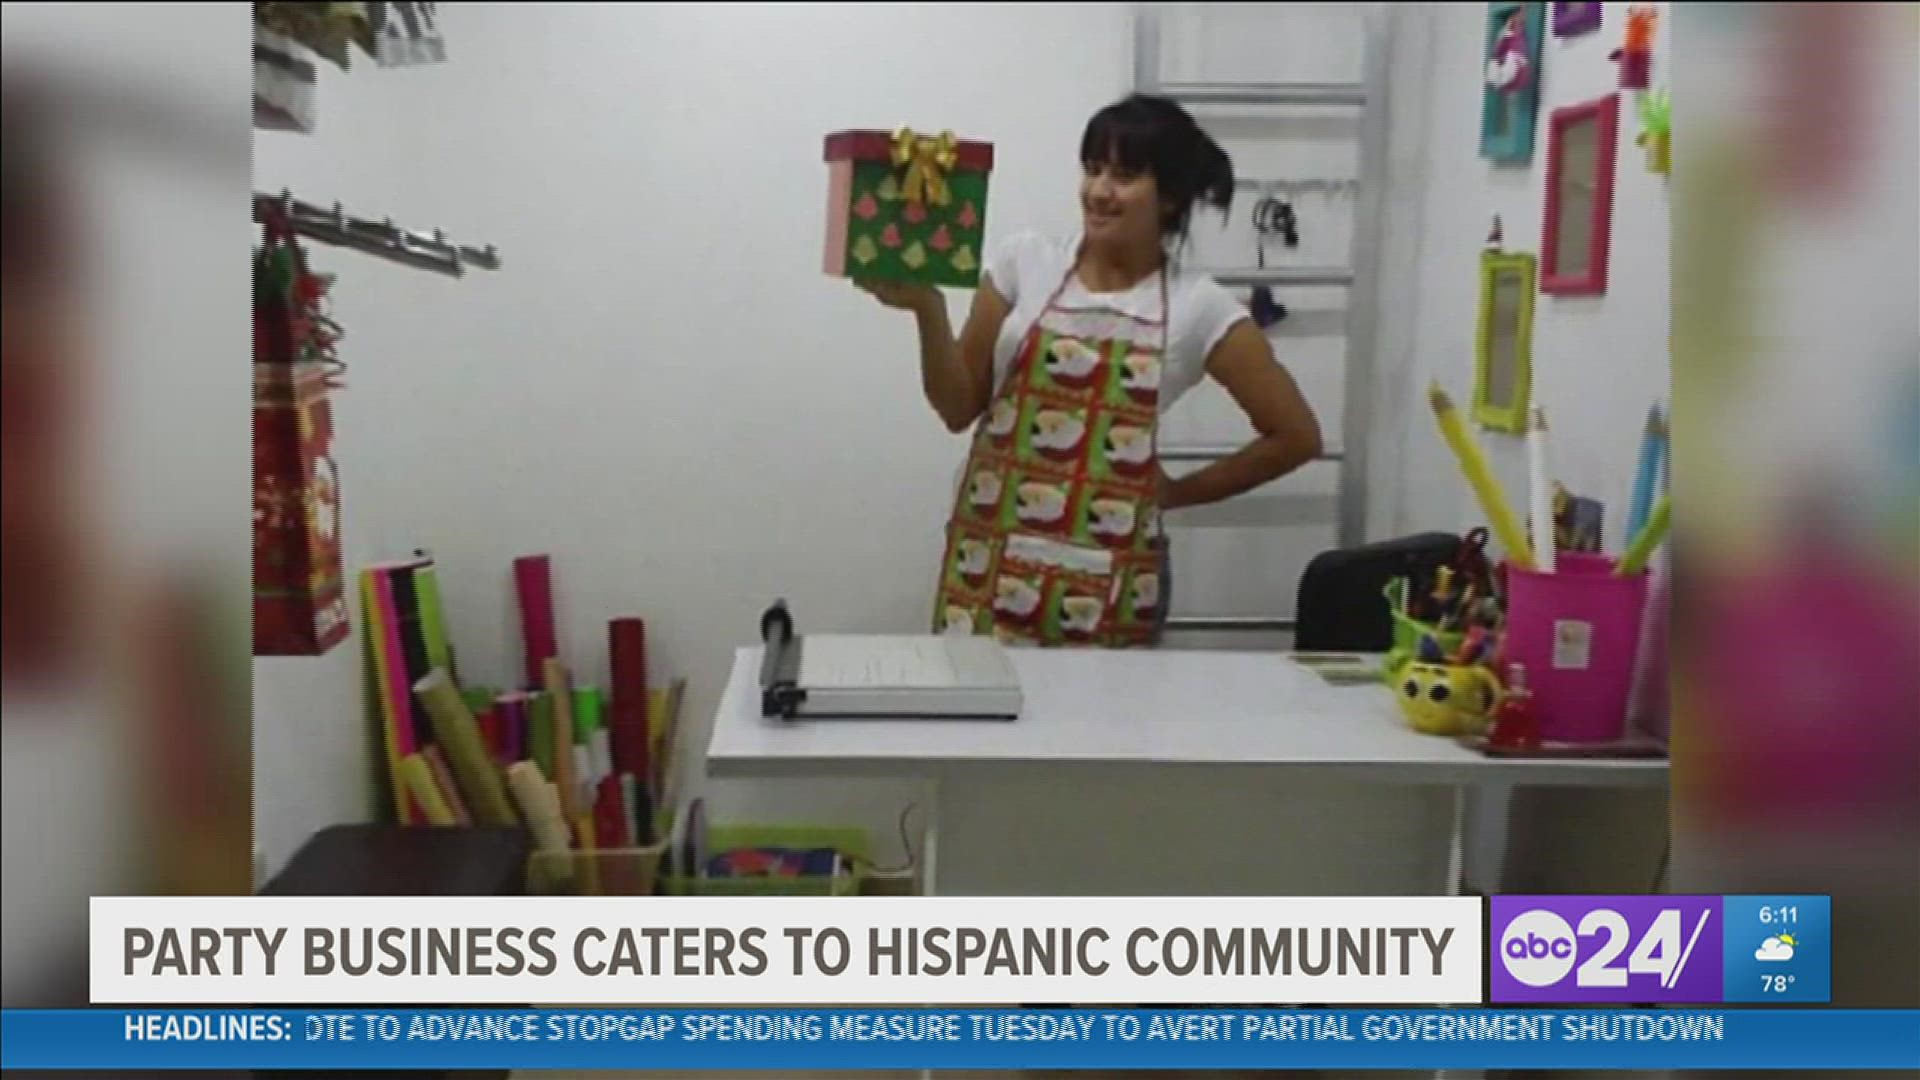 What started as a small arts and crafts business in Venezuela, is now a major balloon and party favor business in Collierville catering to the Hispanic community.